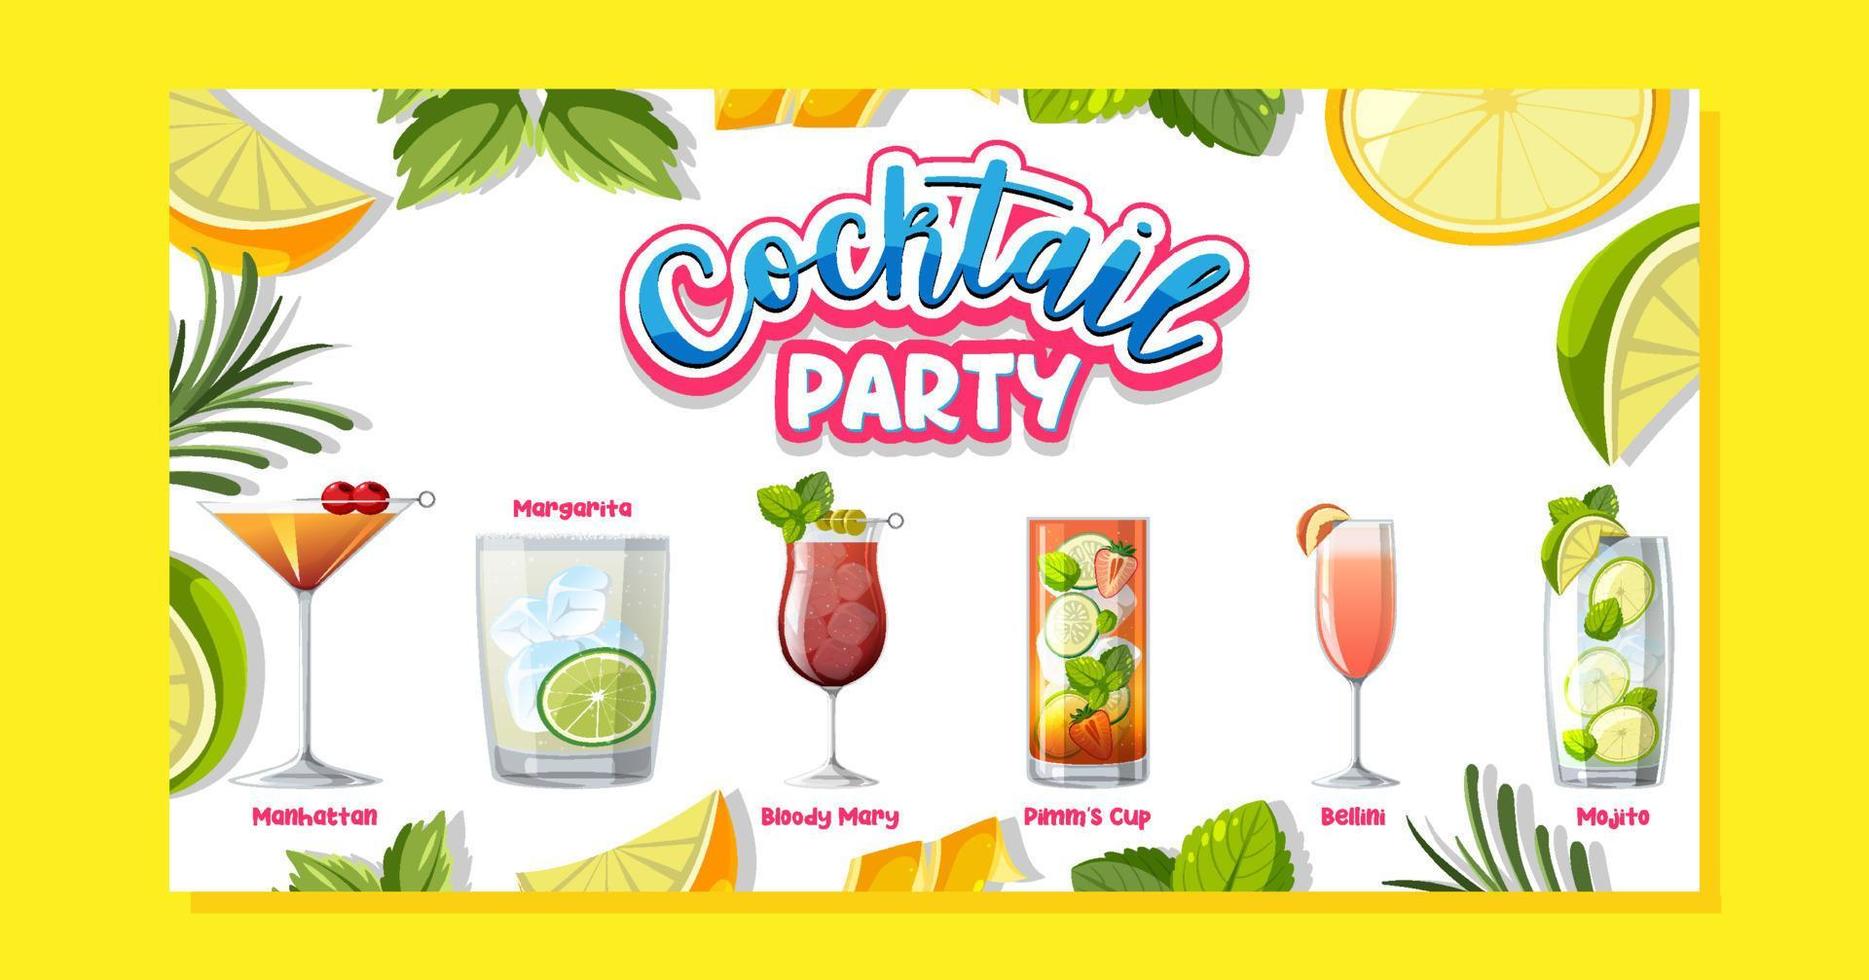 Cocktail party menu banner vector